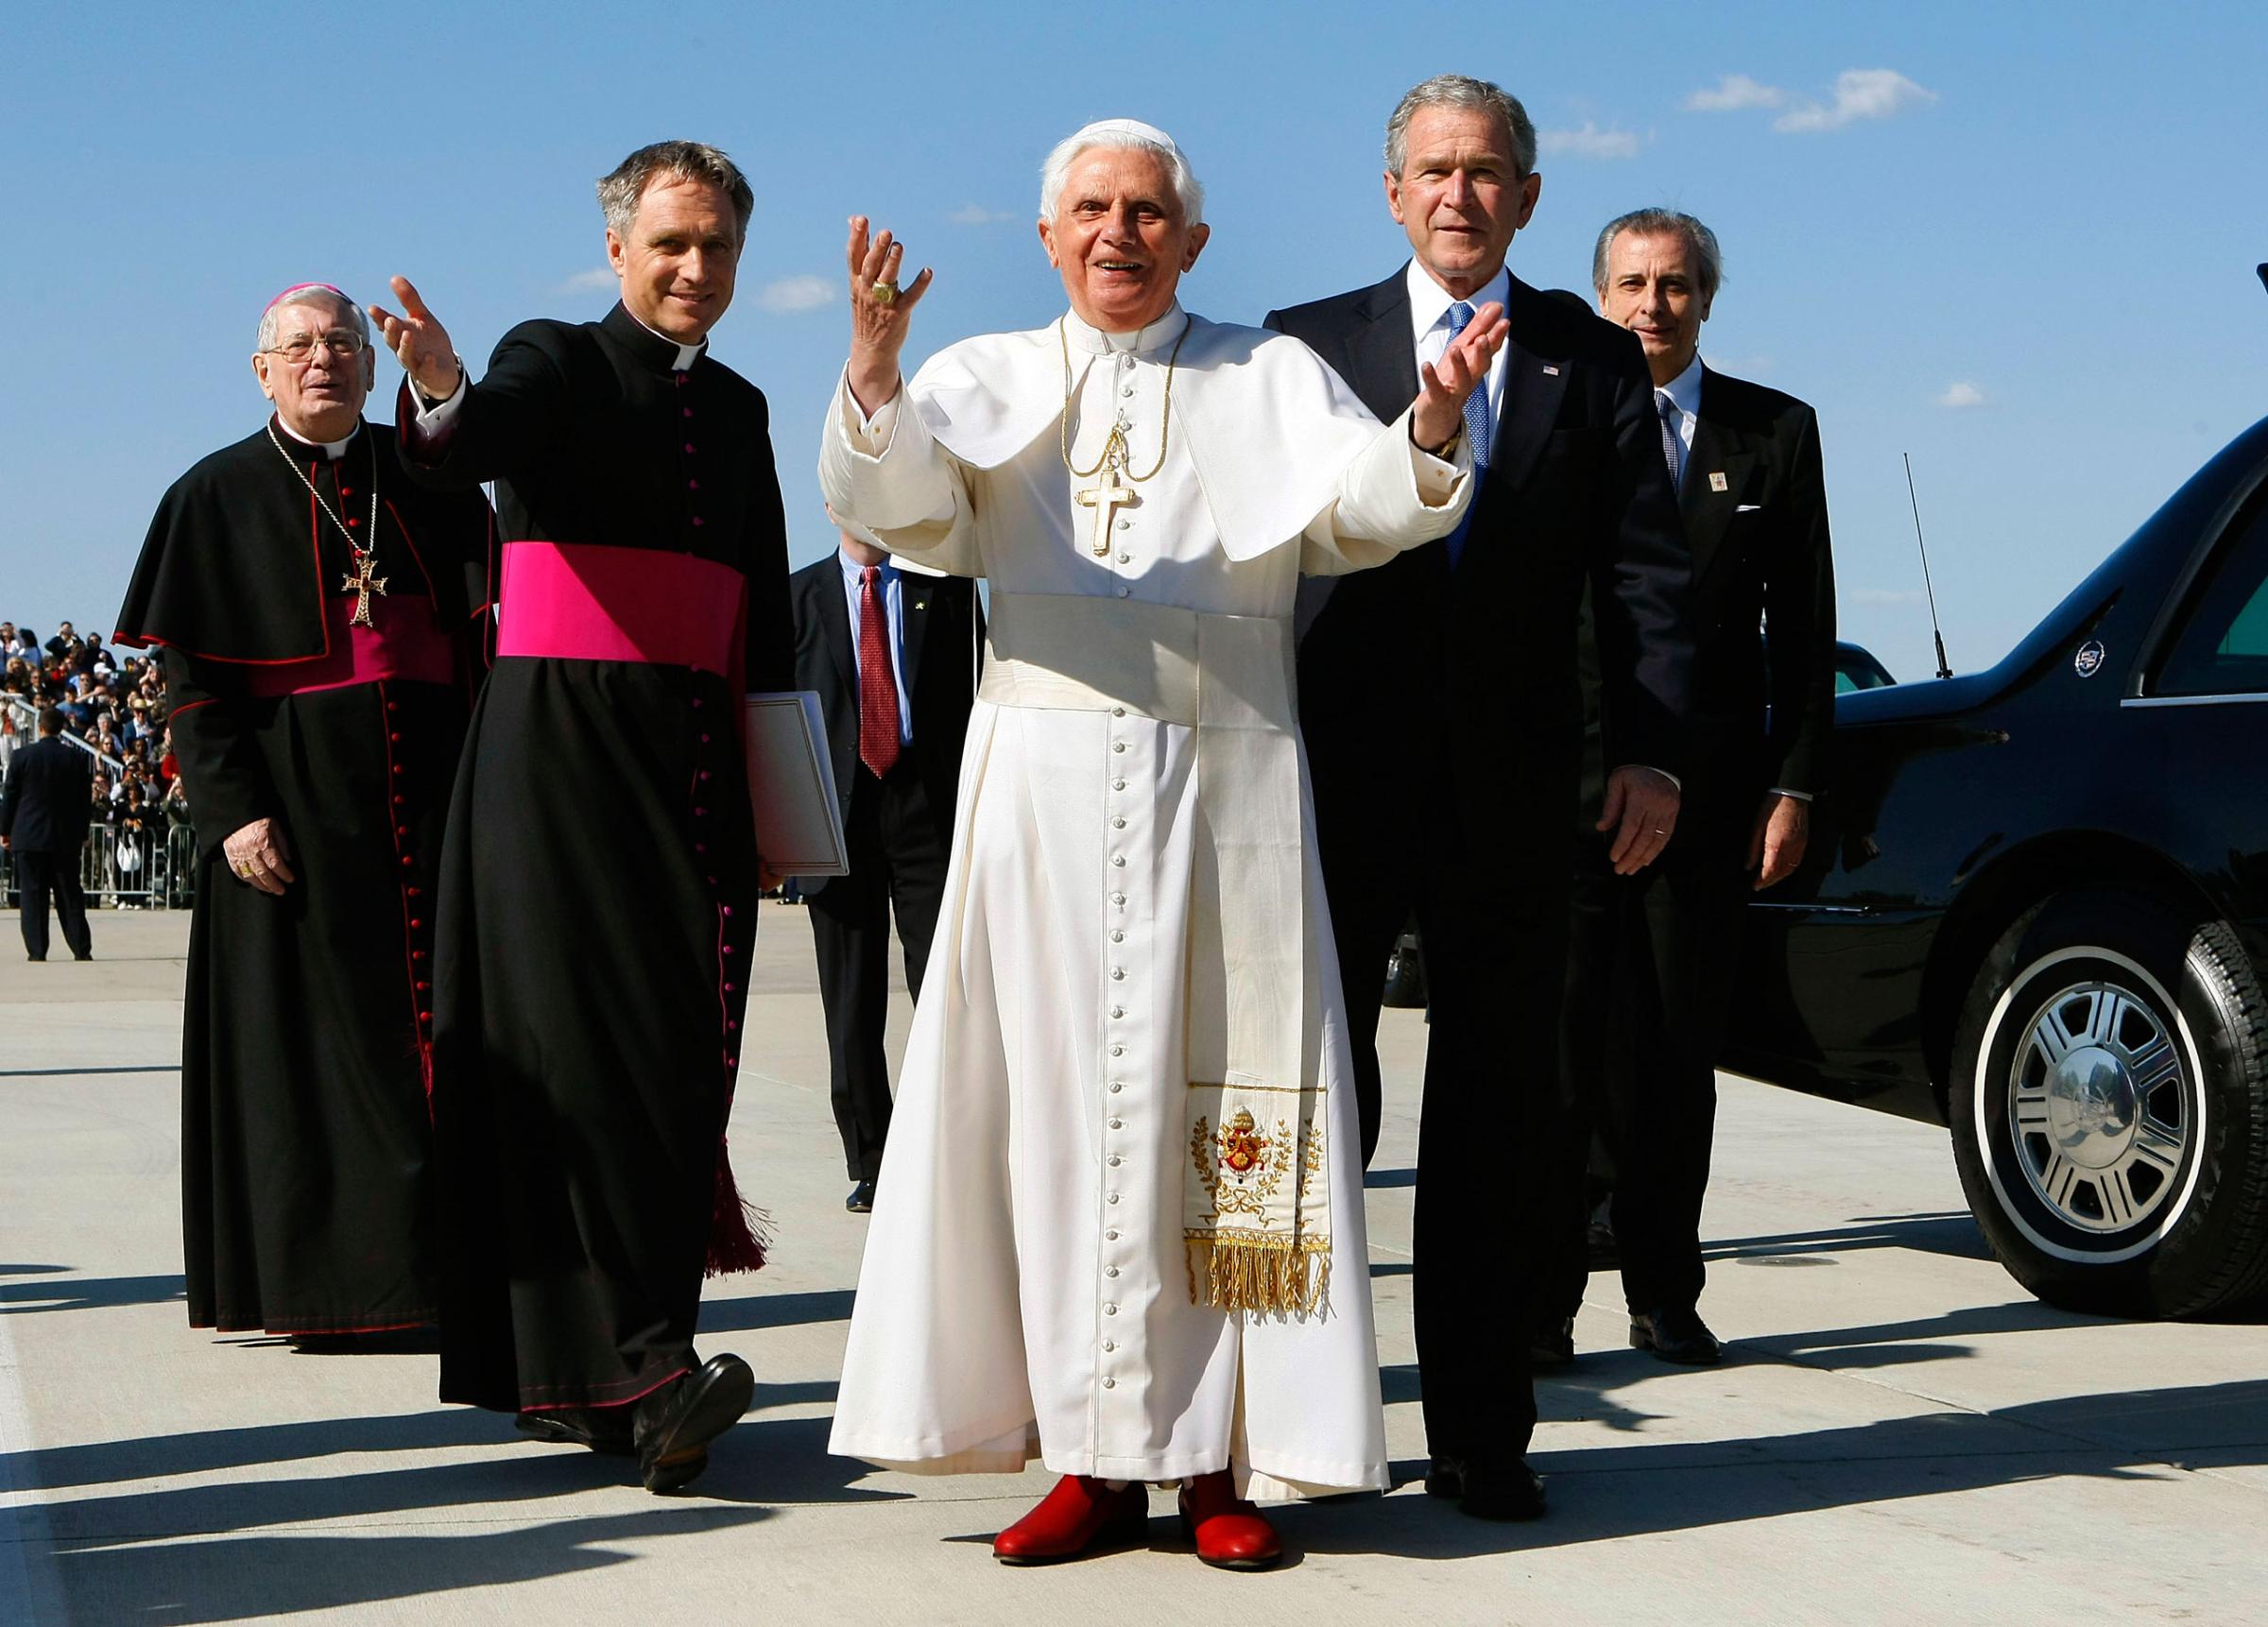 Pope Benedict XVI reacts to the cheering crowd as he stands with U.S. President George W. Bush upon his arrival at Andrews Air Force Base, April 15, 2008 in Camp Springs, Maryland.